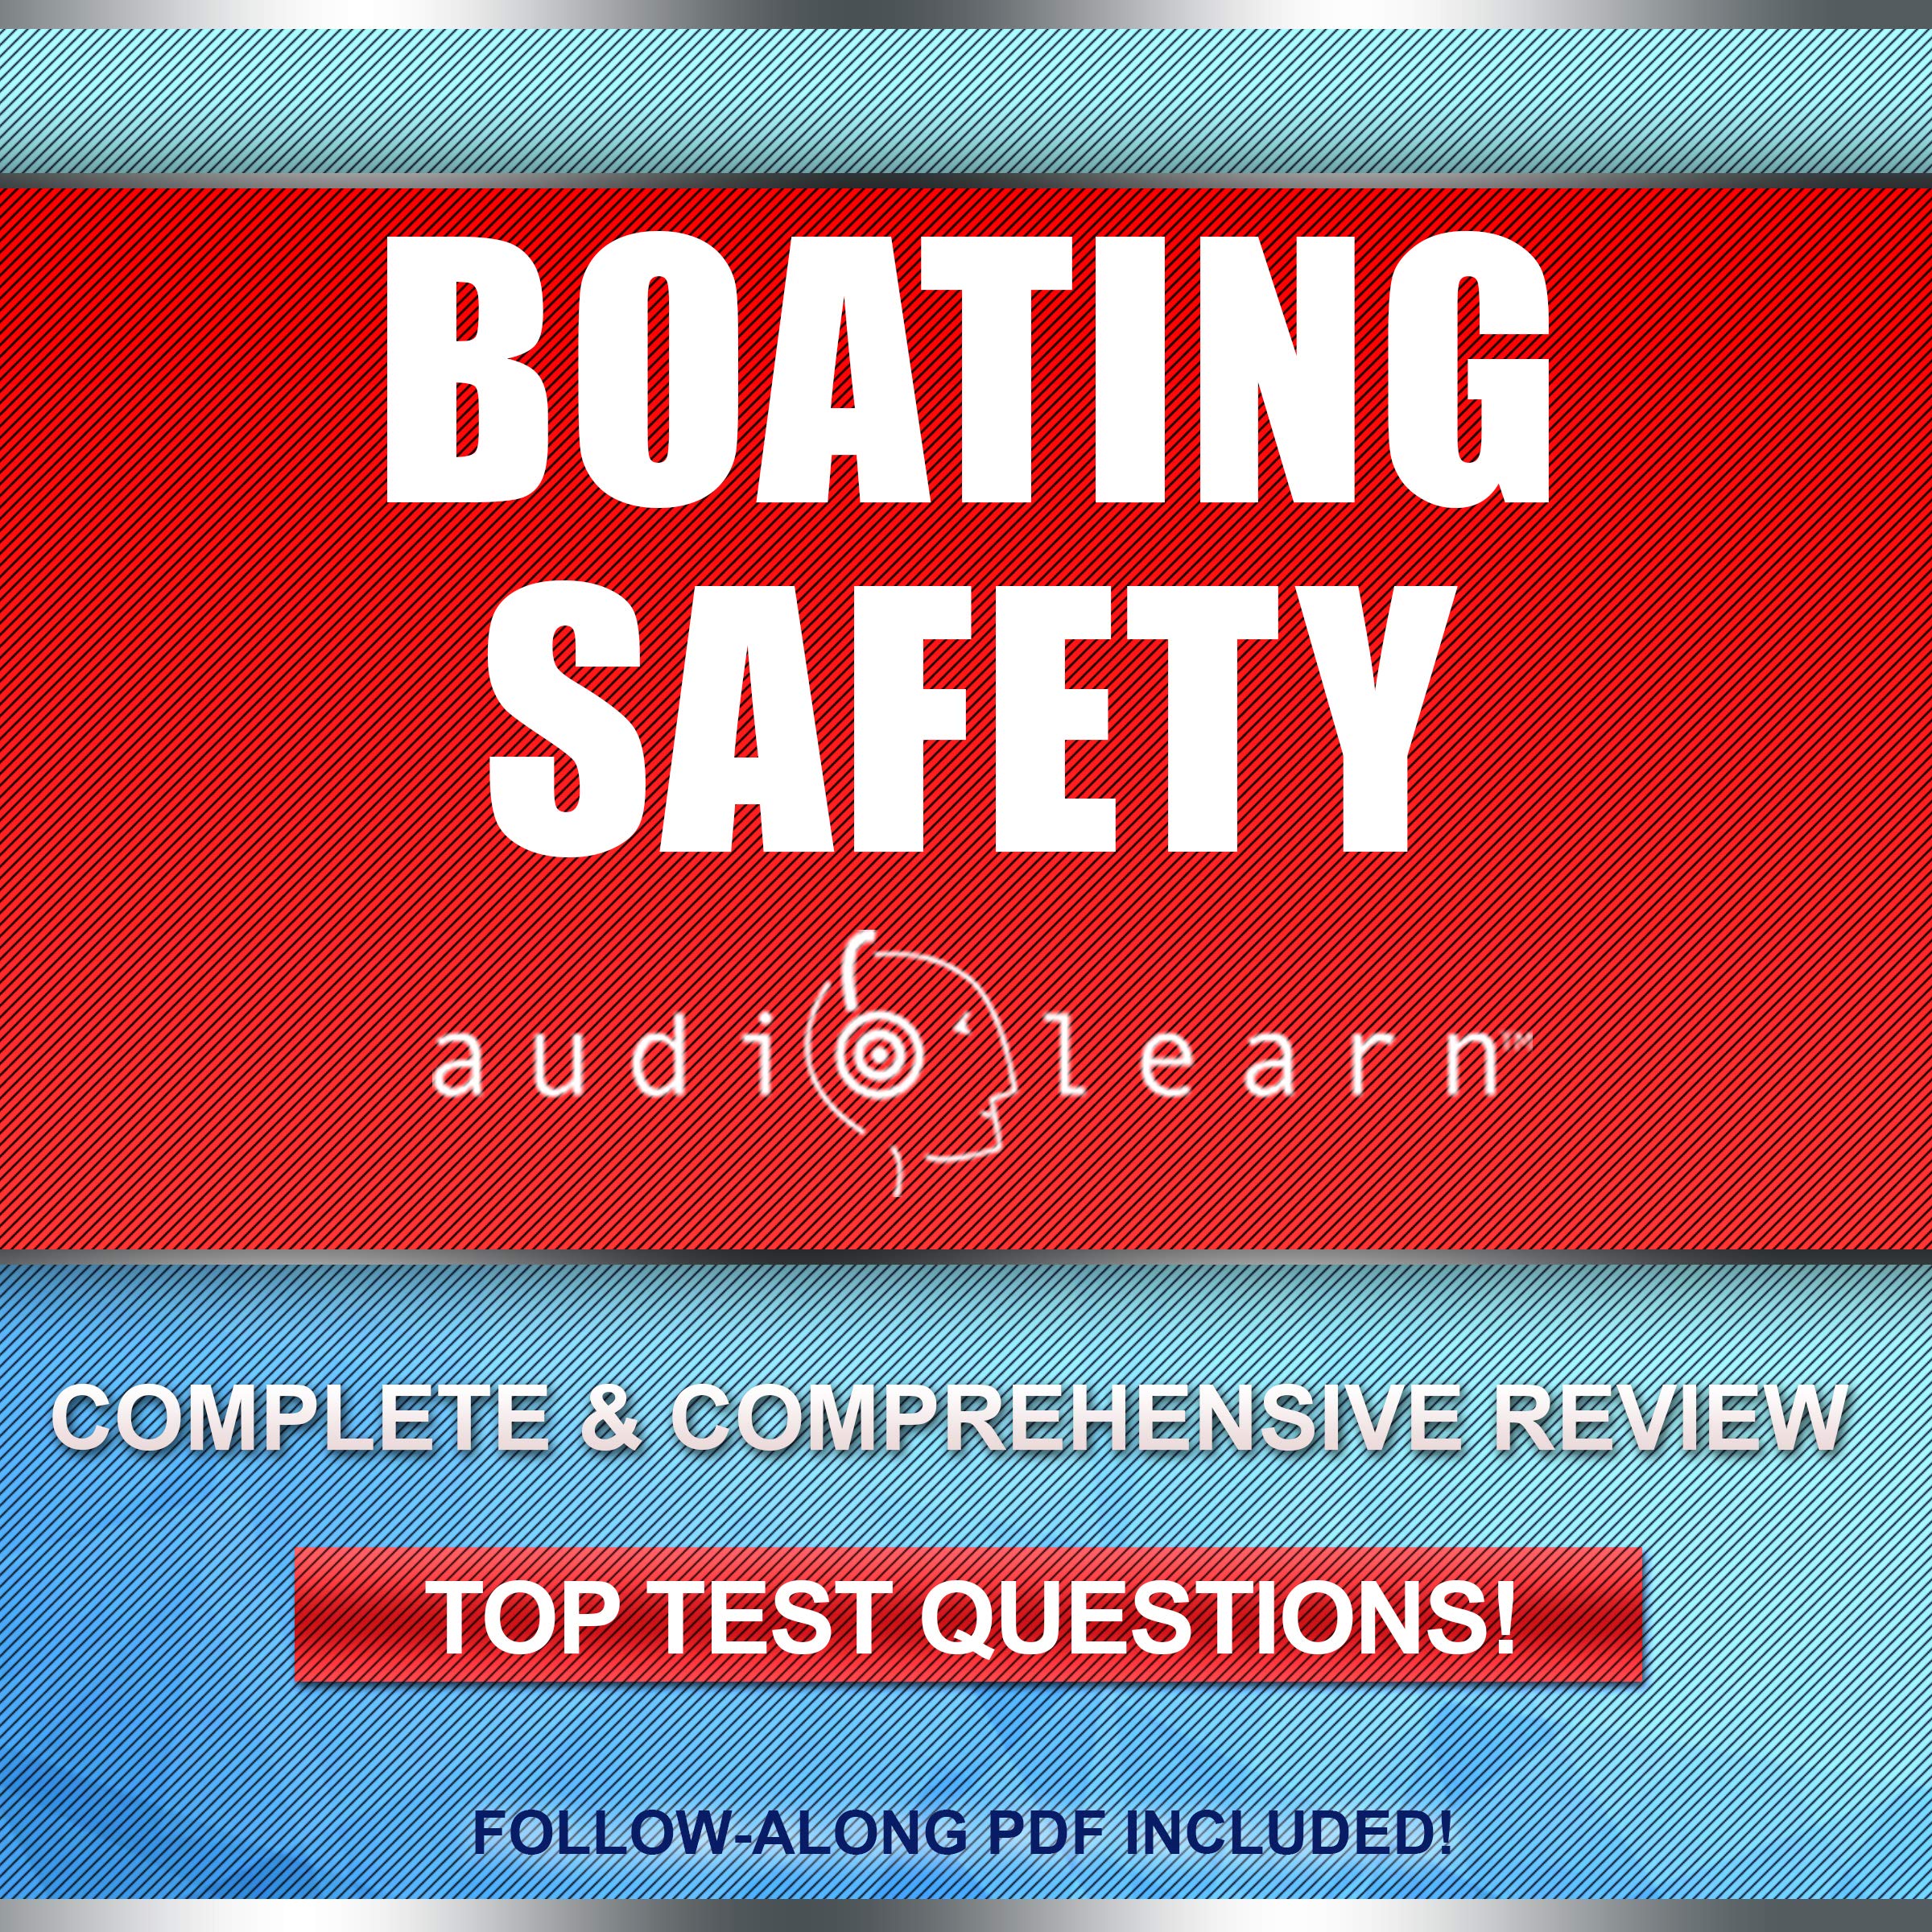 Boating Safety AudioLearn: Complete Audio Course for Boating Safety License and Boater Certification Exam!